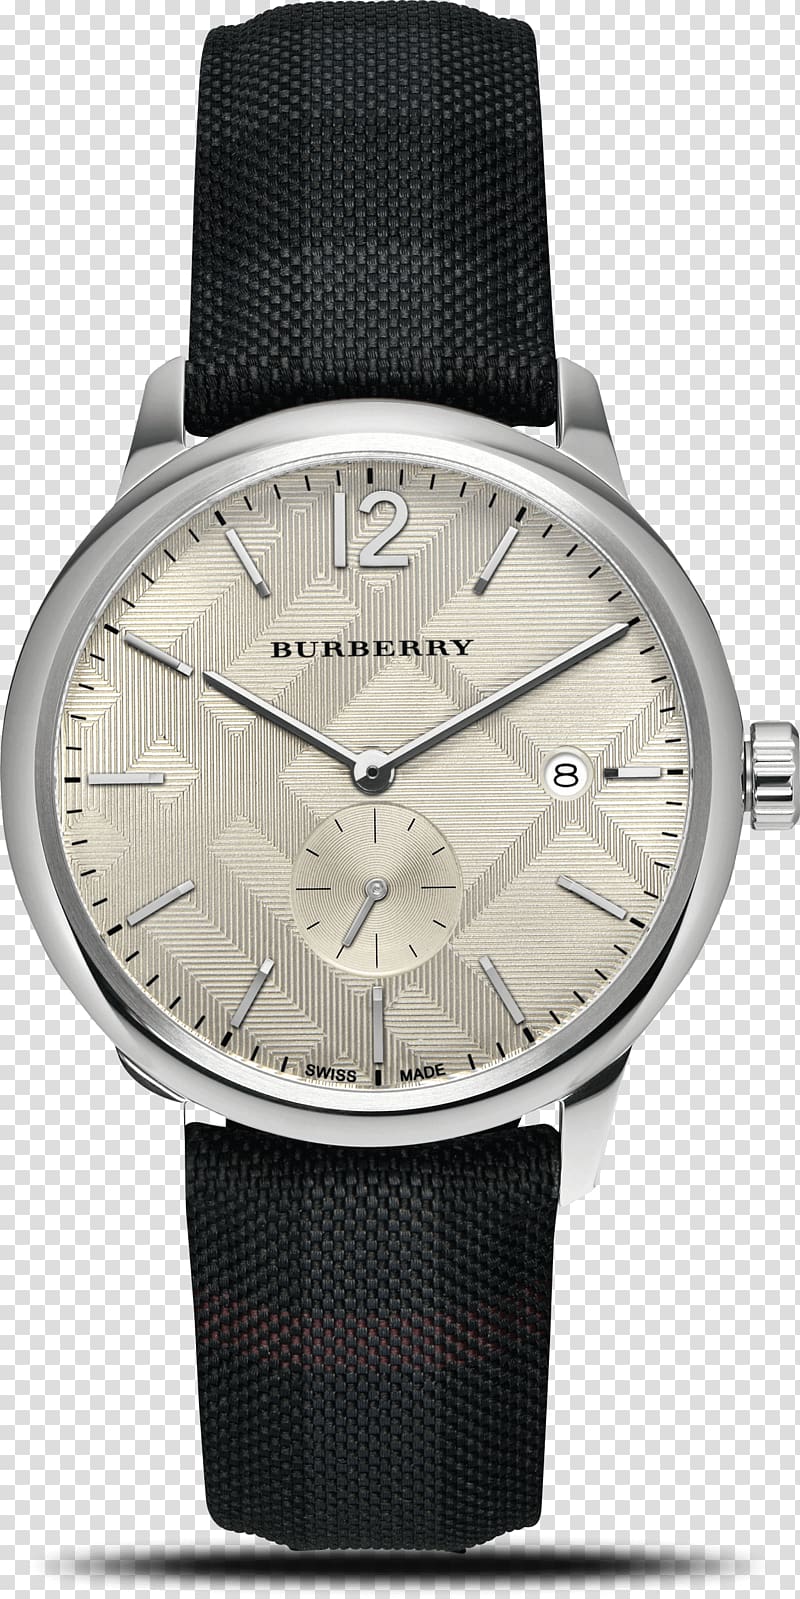 Burberry Watch Clothing Fashion Strap, burberry transparent background PNG clipart